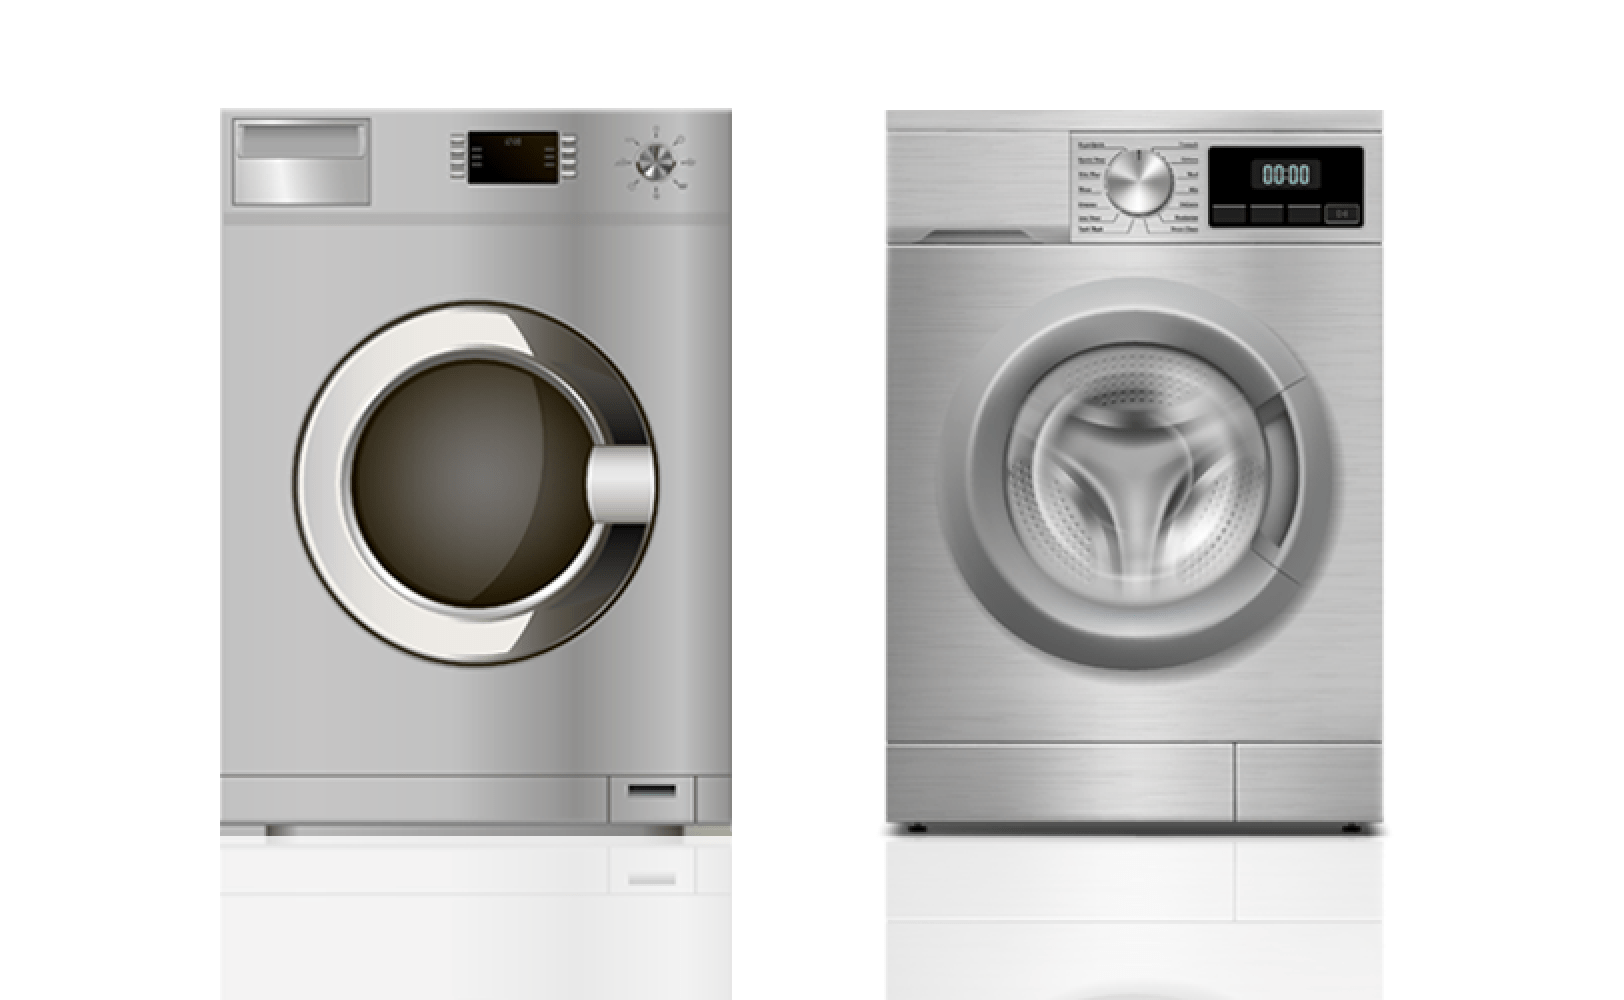 Washer Repair Service in Huntington Station